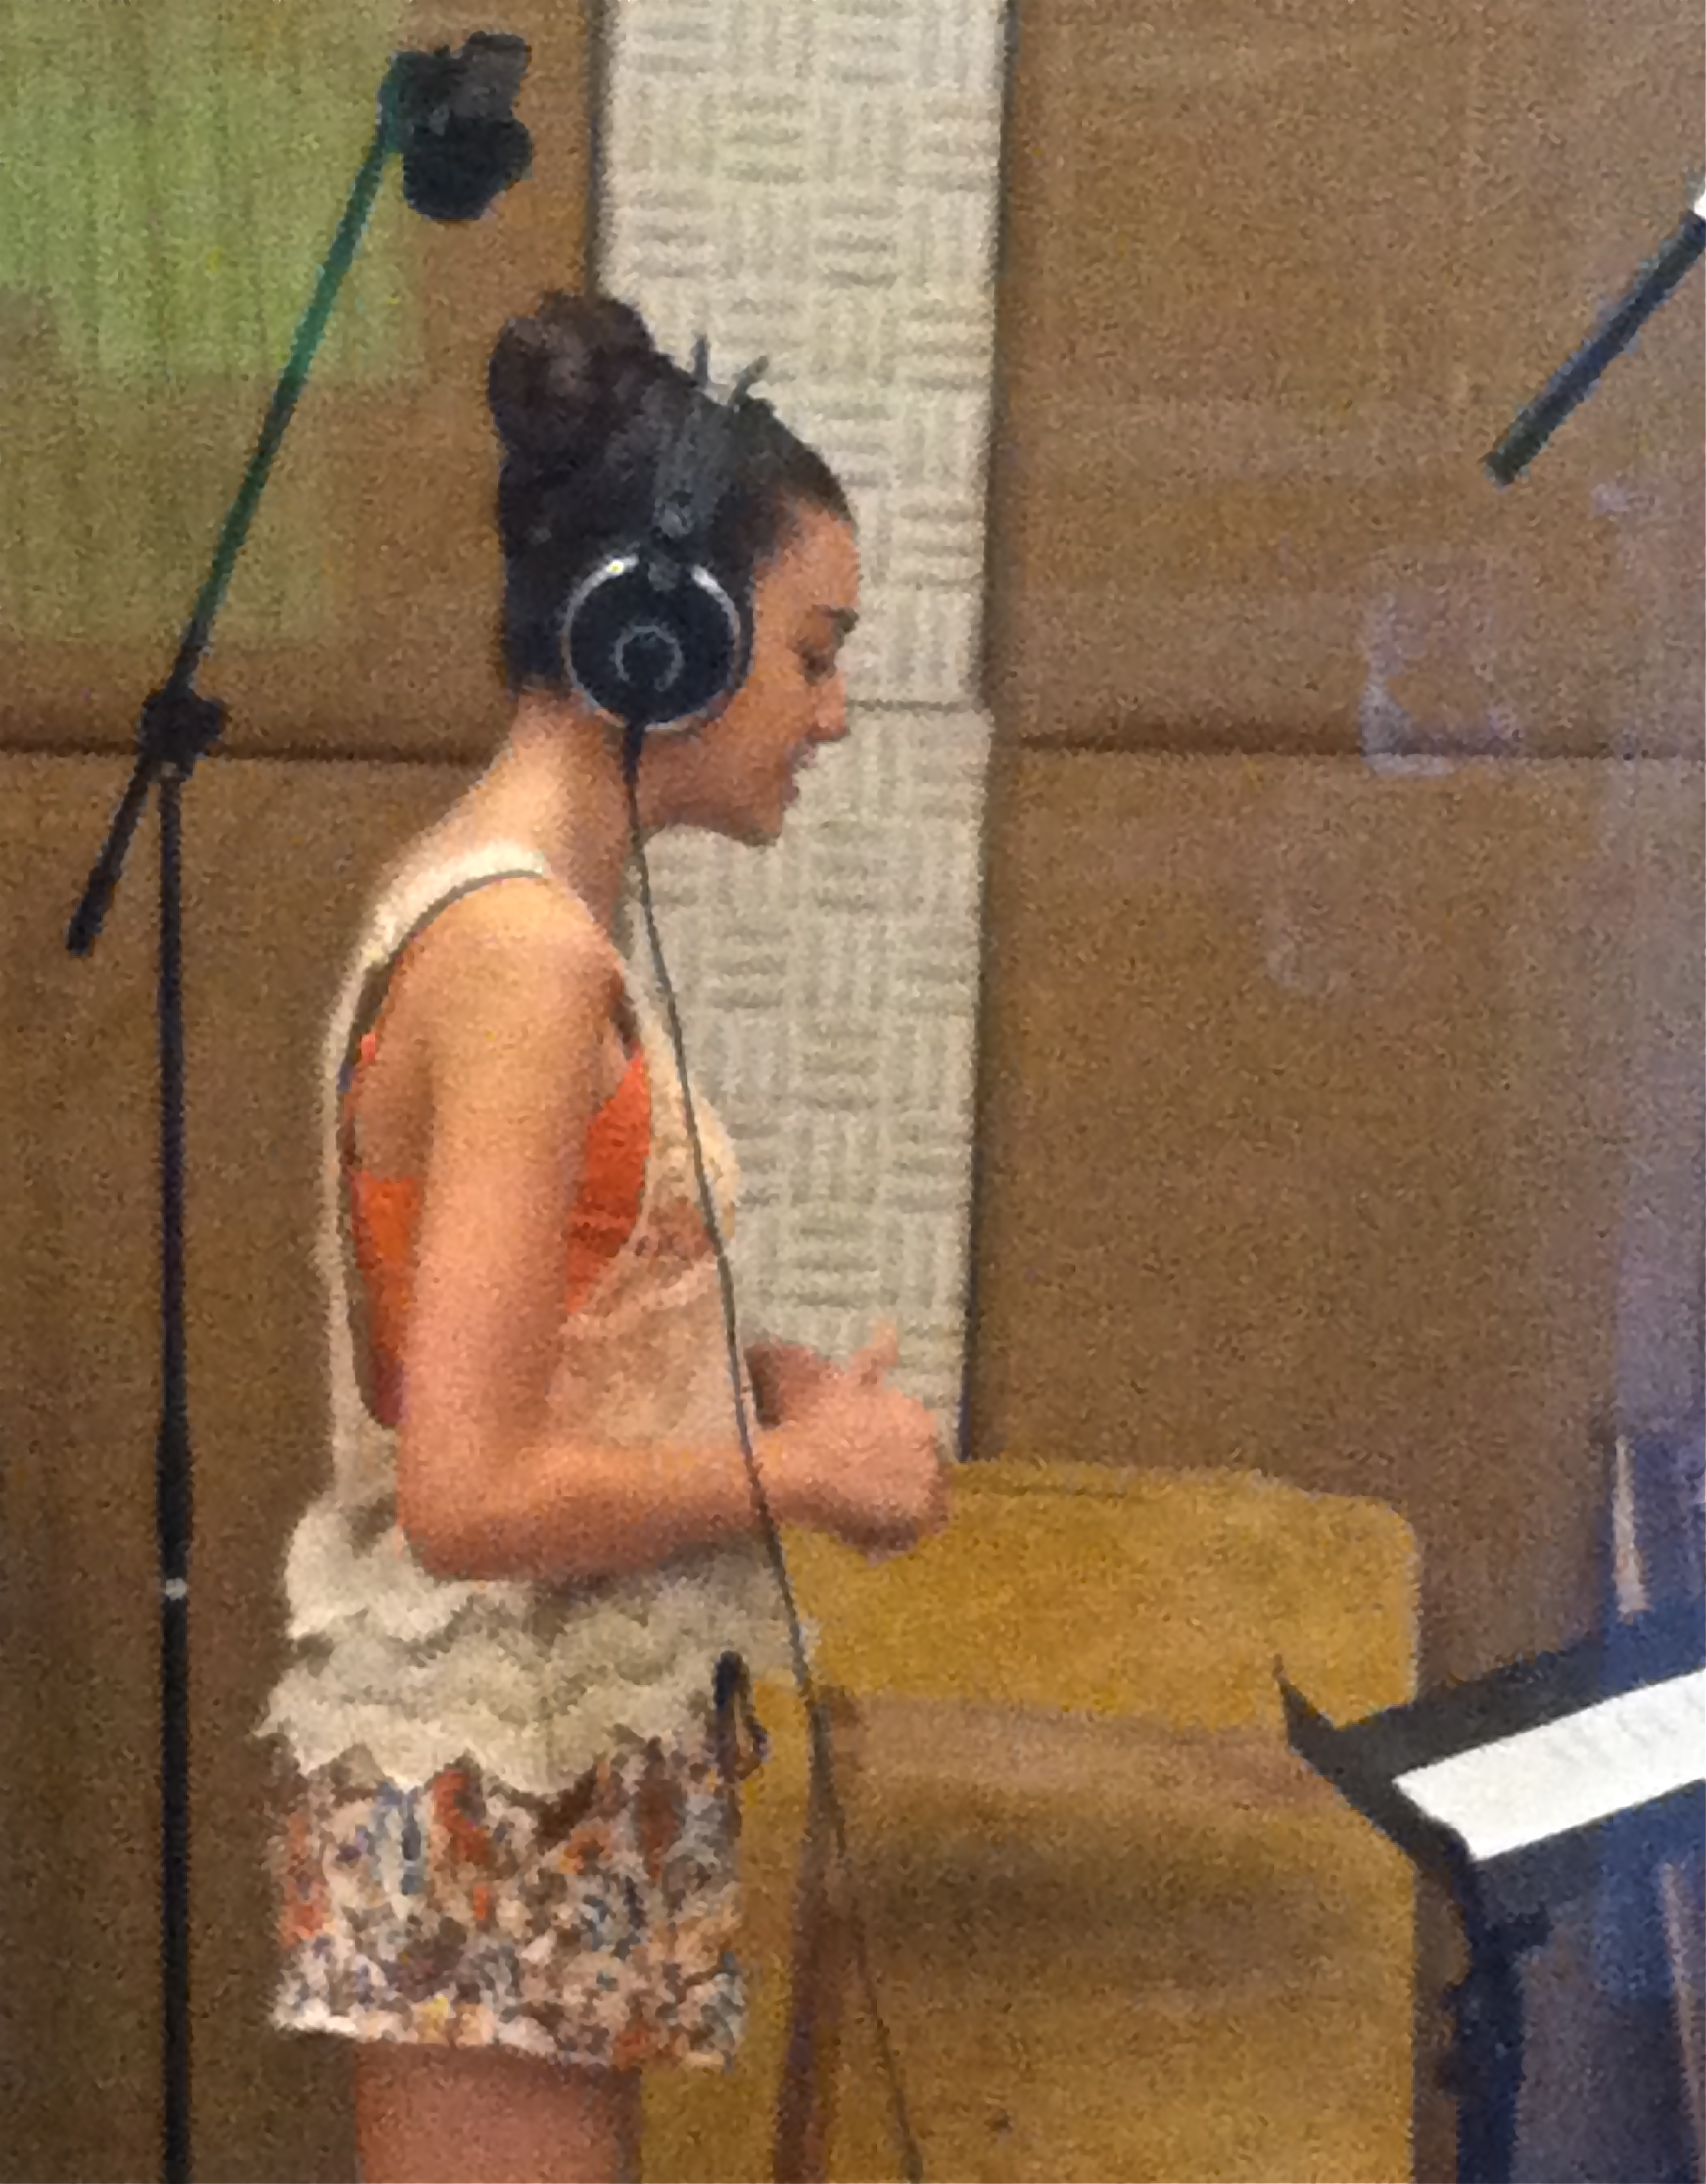 ADR for 